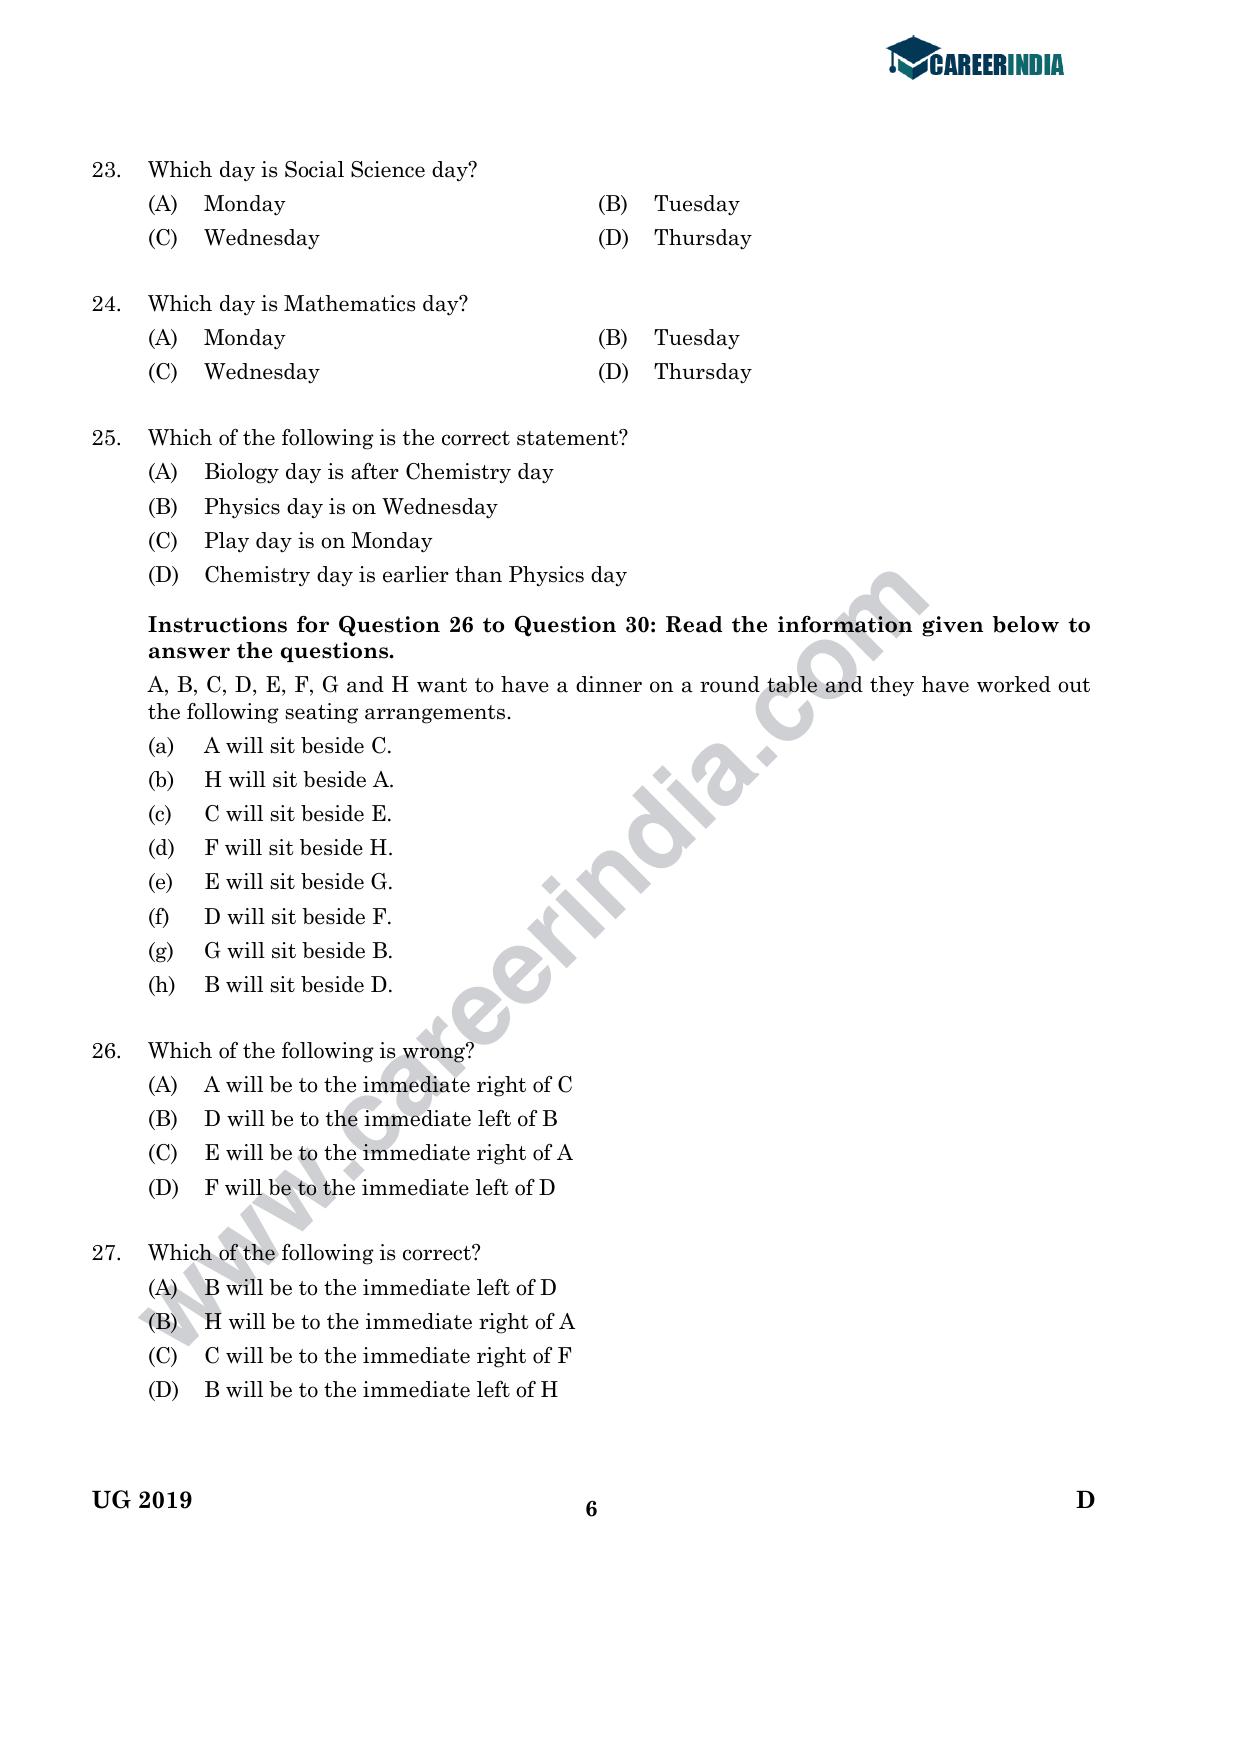 CLAT 2019 UG Logical-Reasoning Question Paper - Page 5